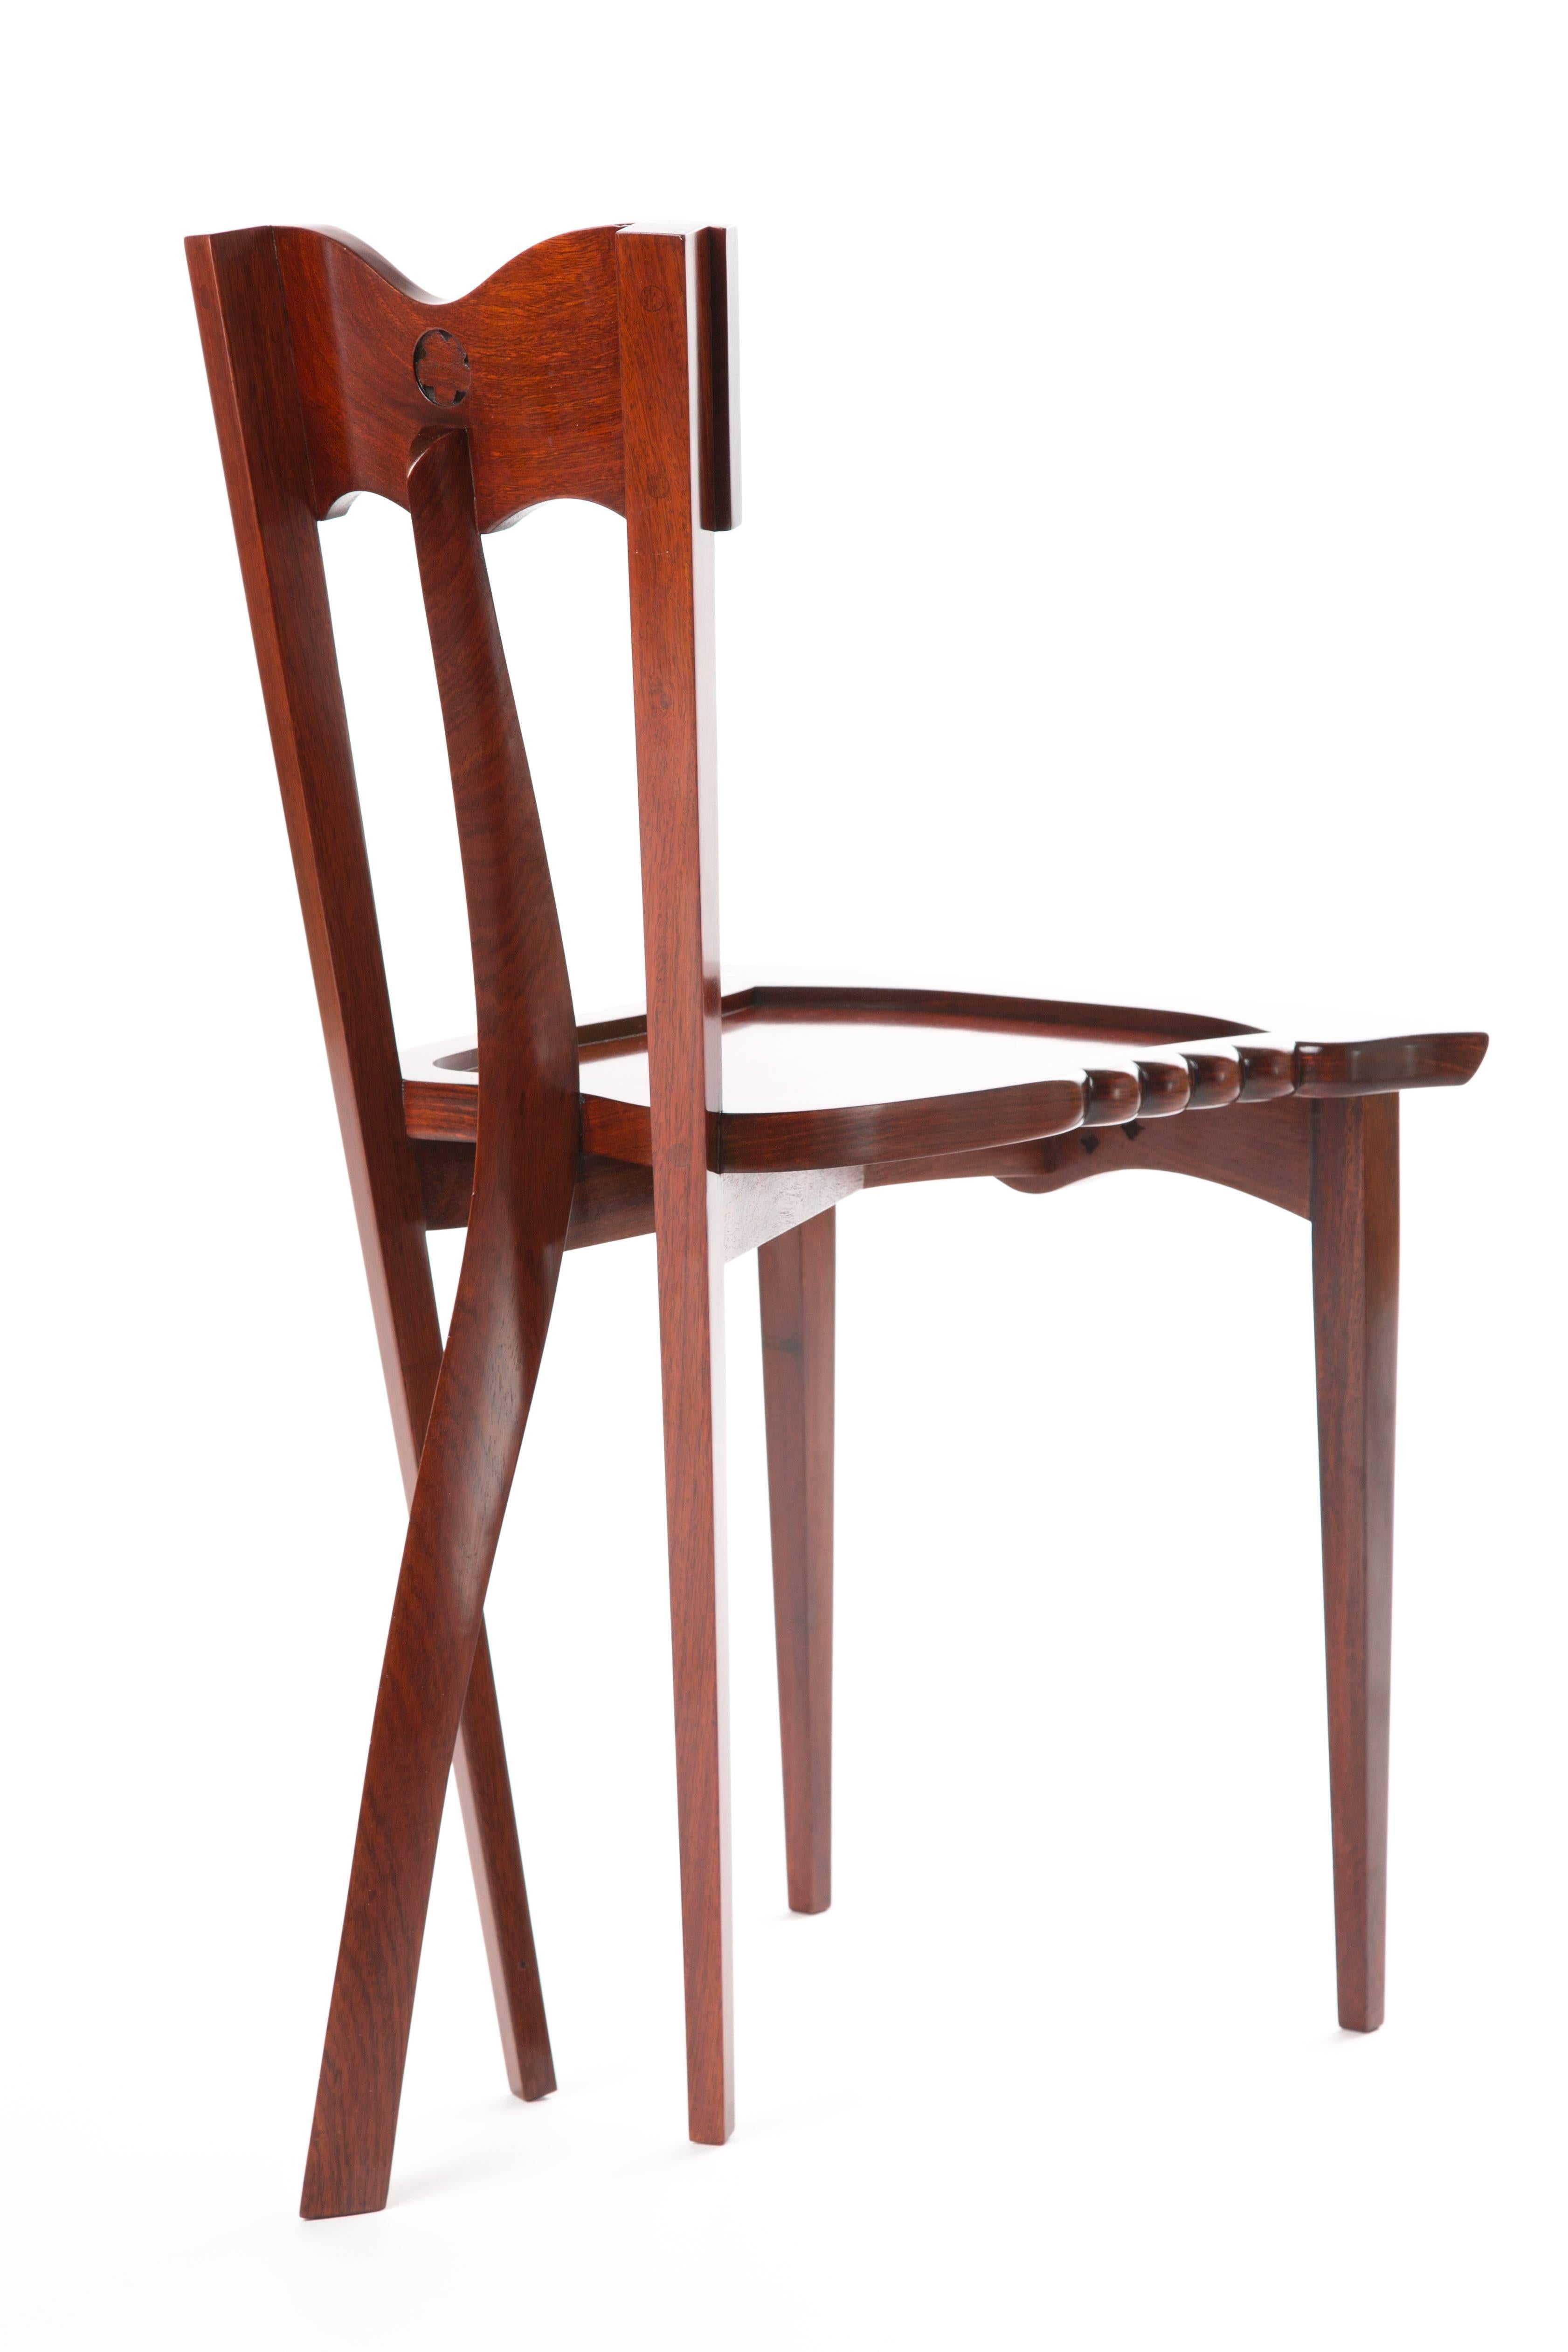 YOOCHAI CHAIR.  Teak wood chair with hand-carved elements and mother-of-pearl details. Al Yoochai chairs are handmade. This chair has five legs. The form is romantic and organic. Modern-Barok.

Borek Sipek (1949-2016) was an Czech architect, but he